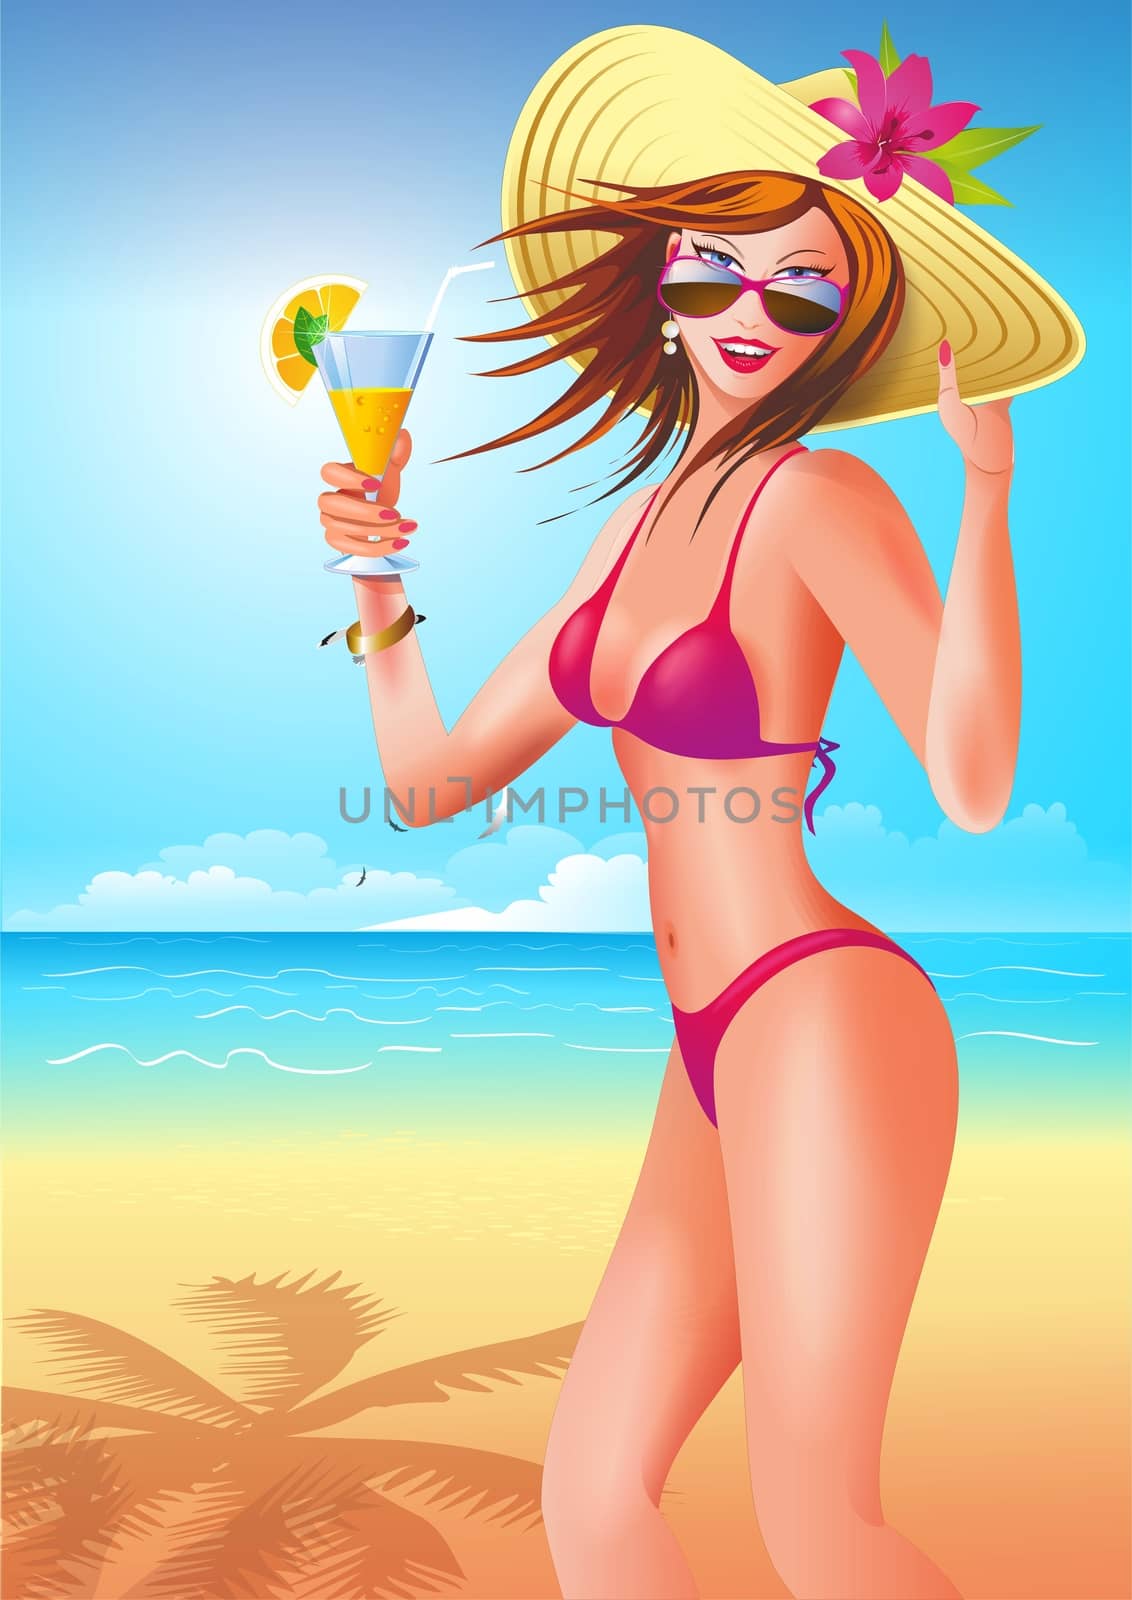 Girl with Drink in a Hand on the Sandy Tropical Beach Illustration.